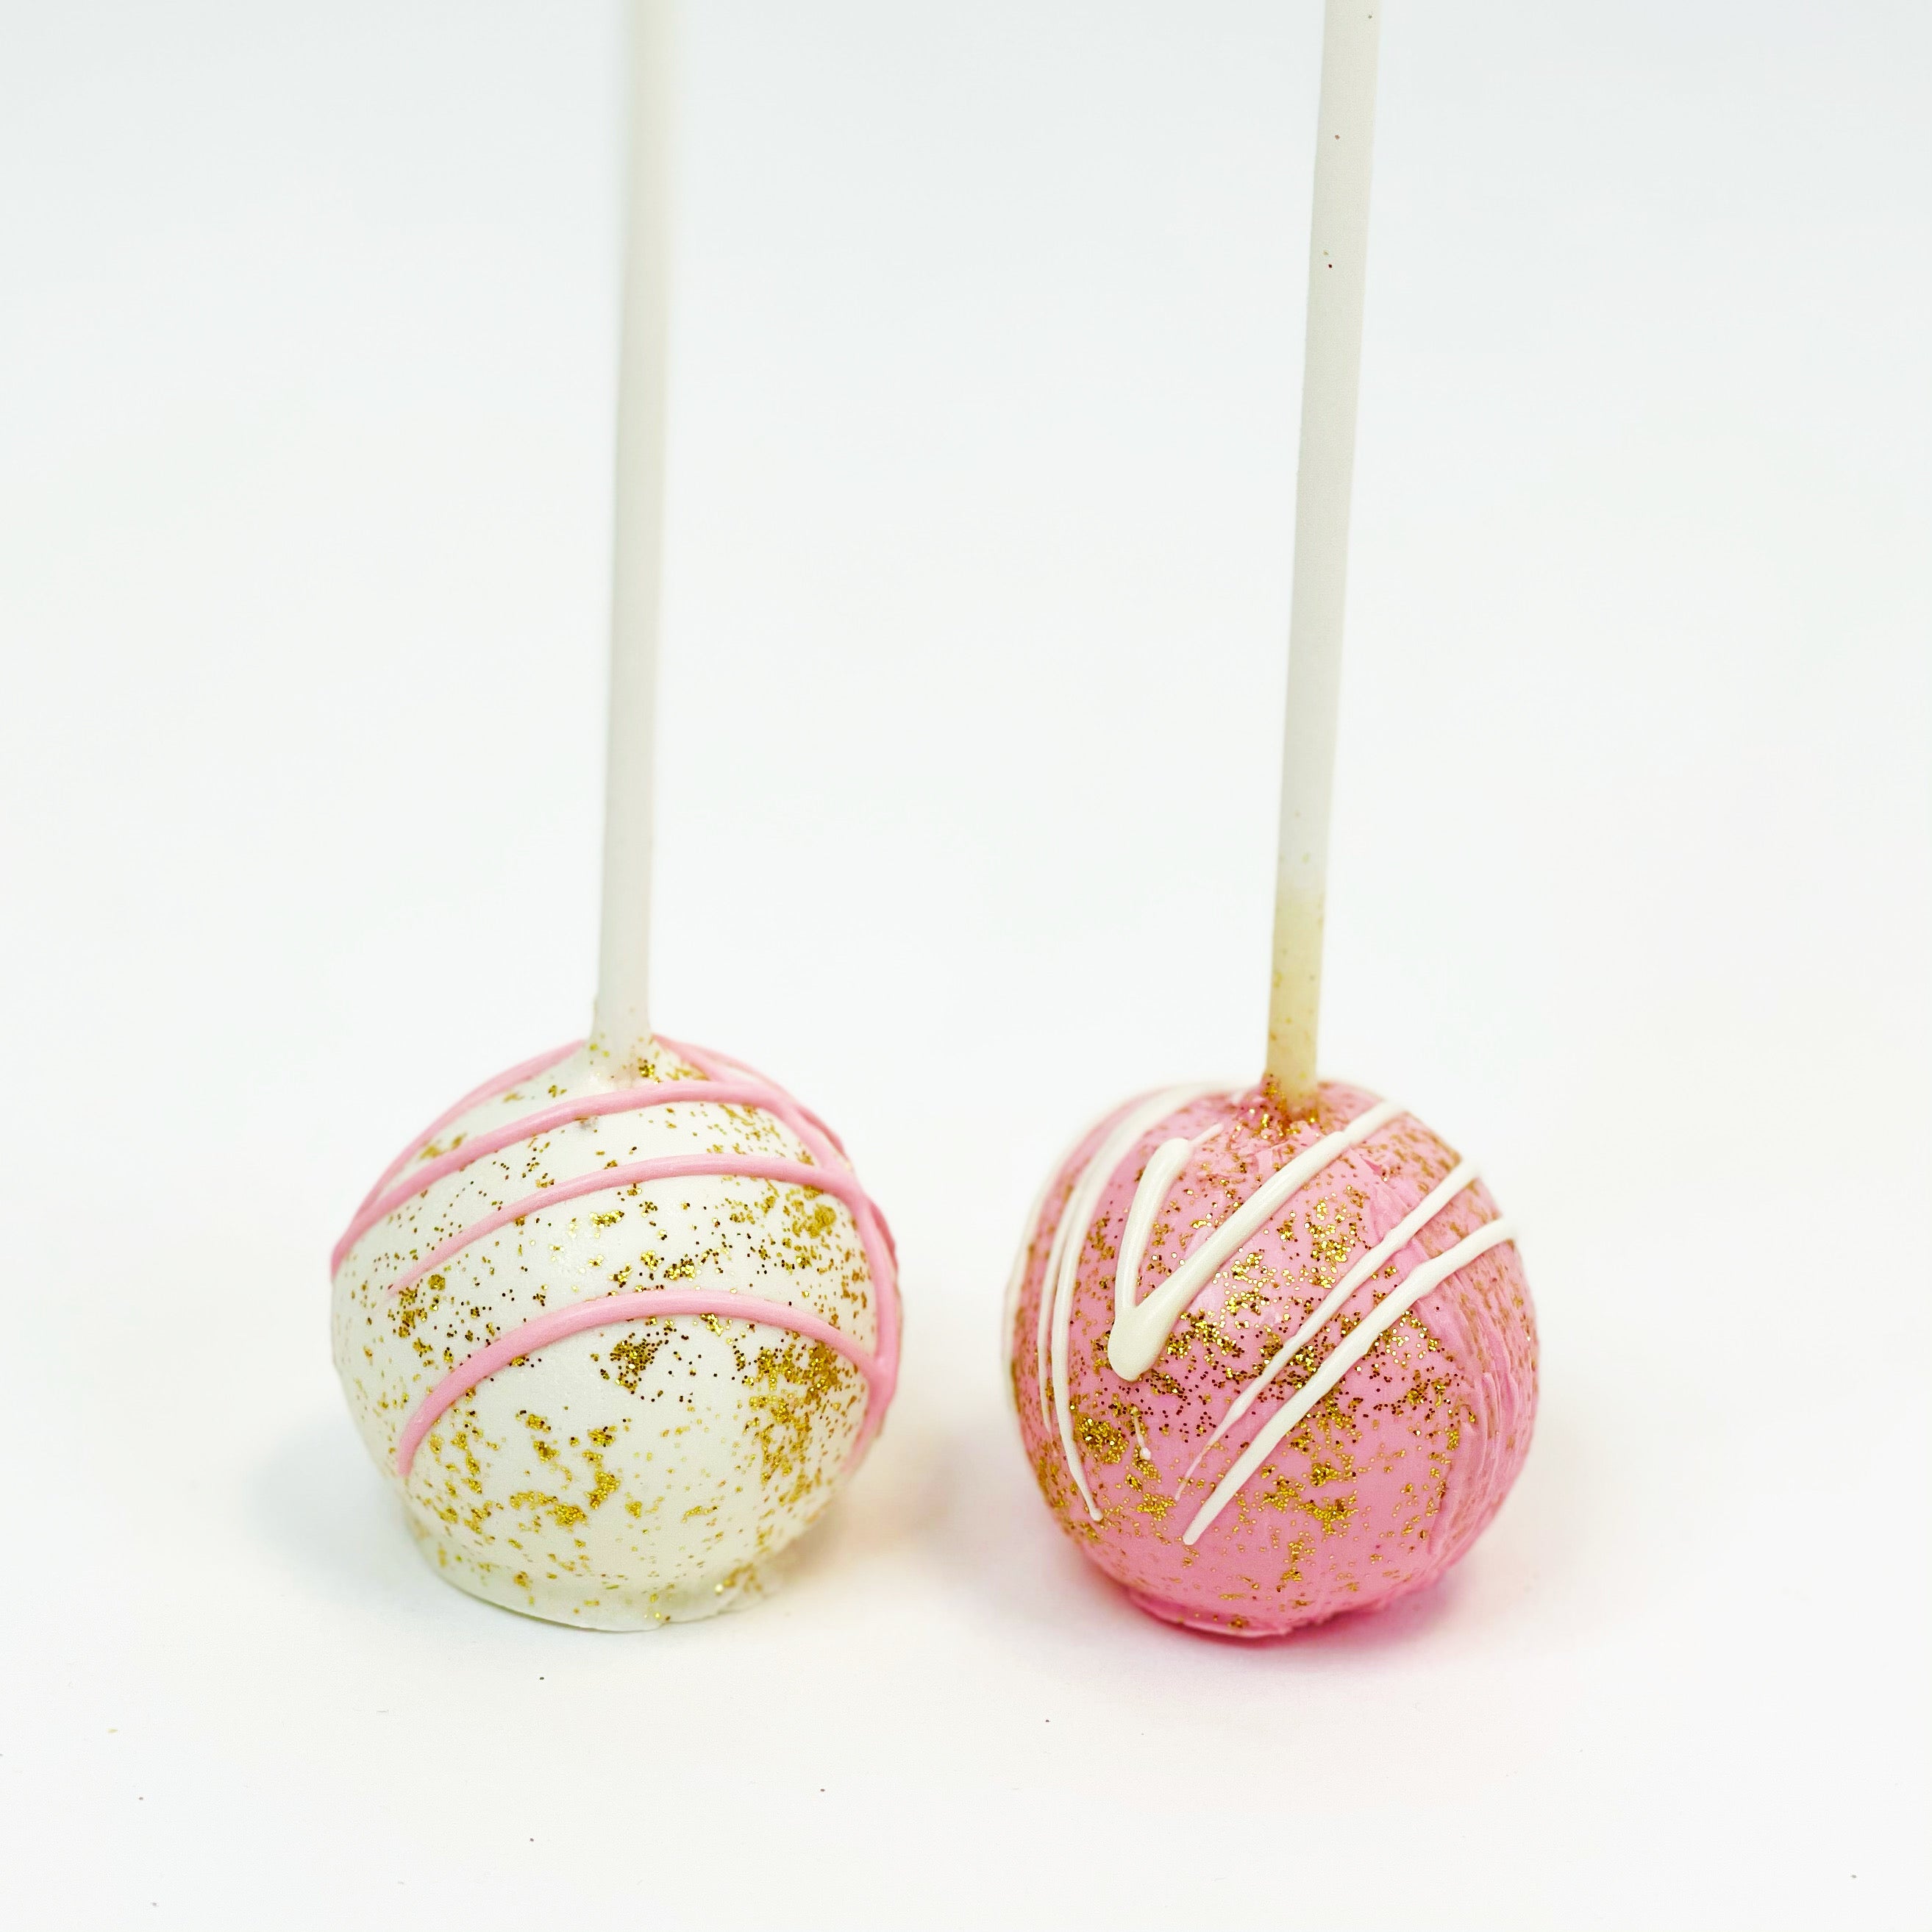 Cake Pop in Pink or White